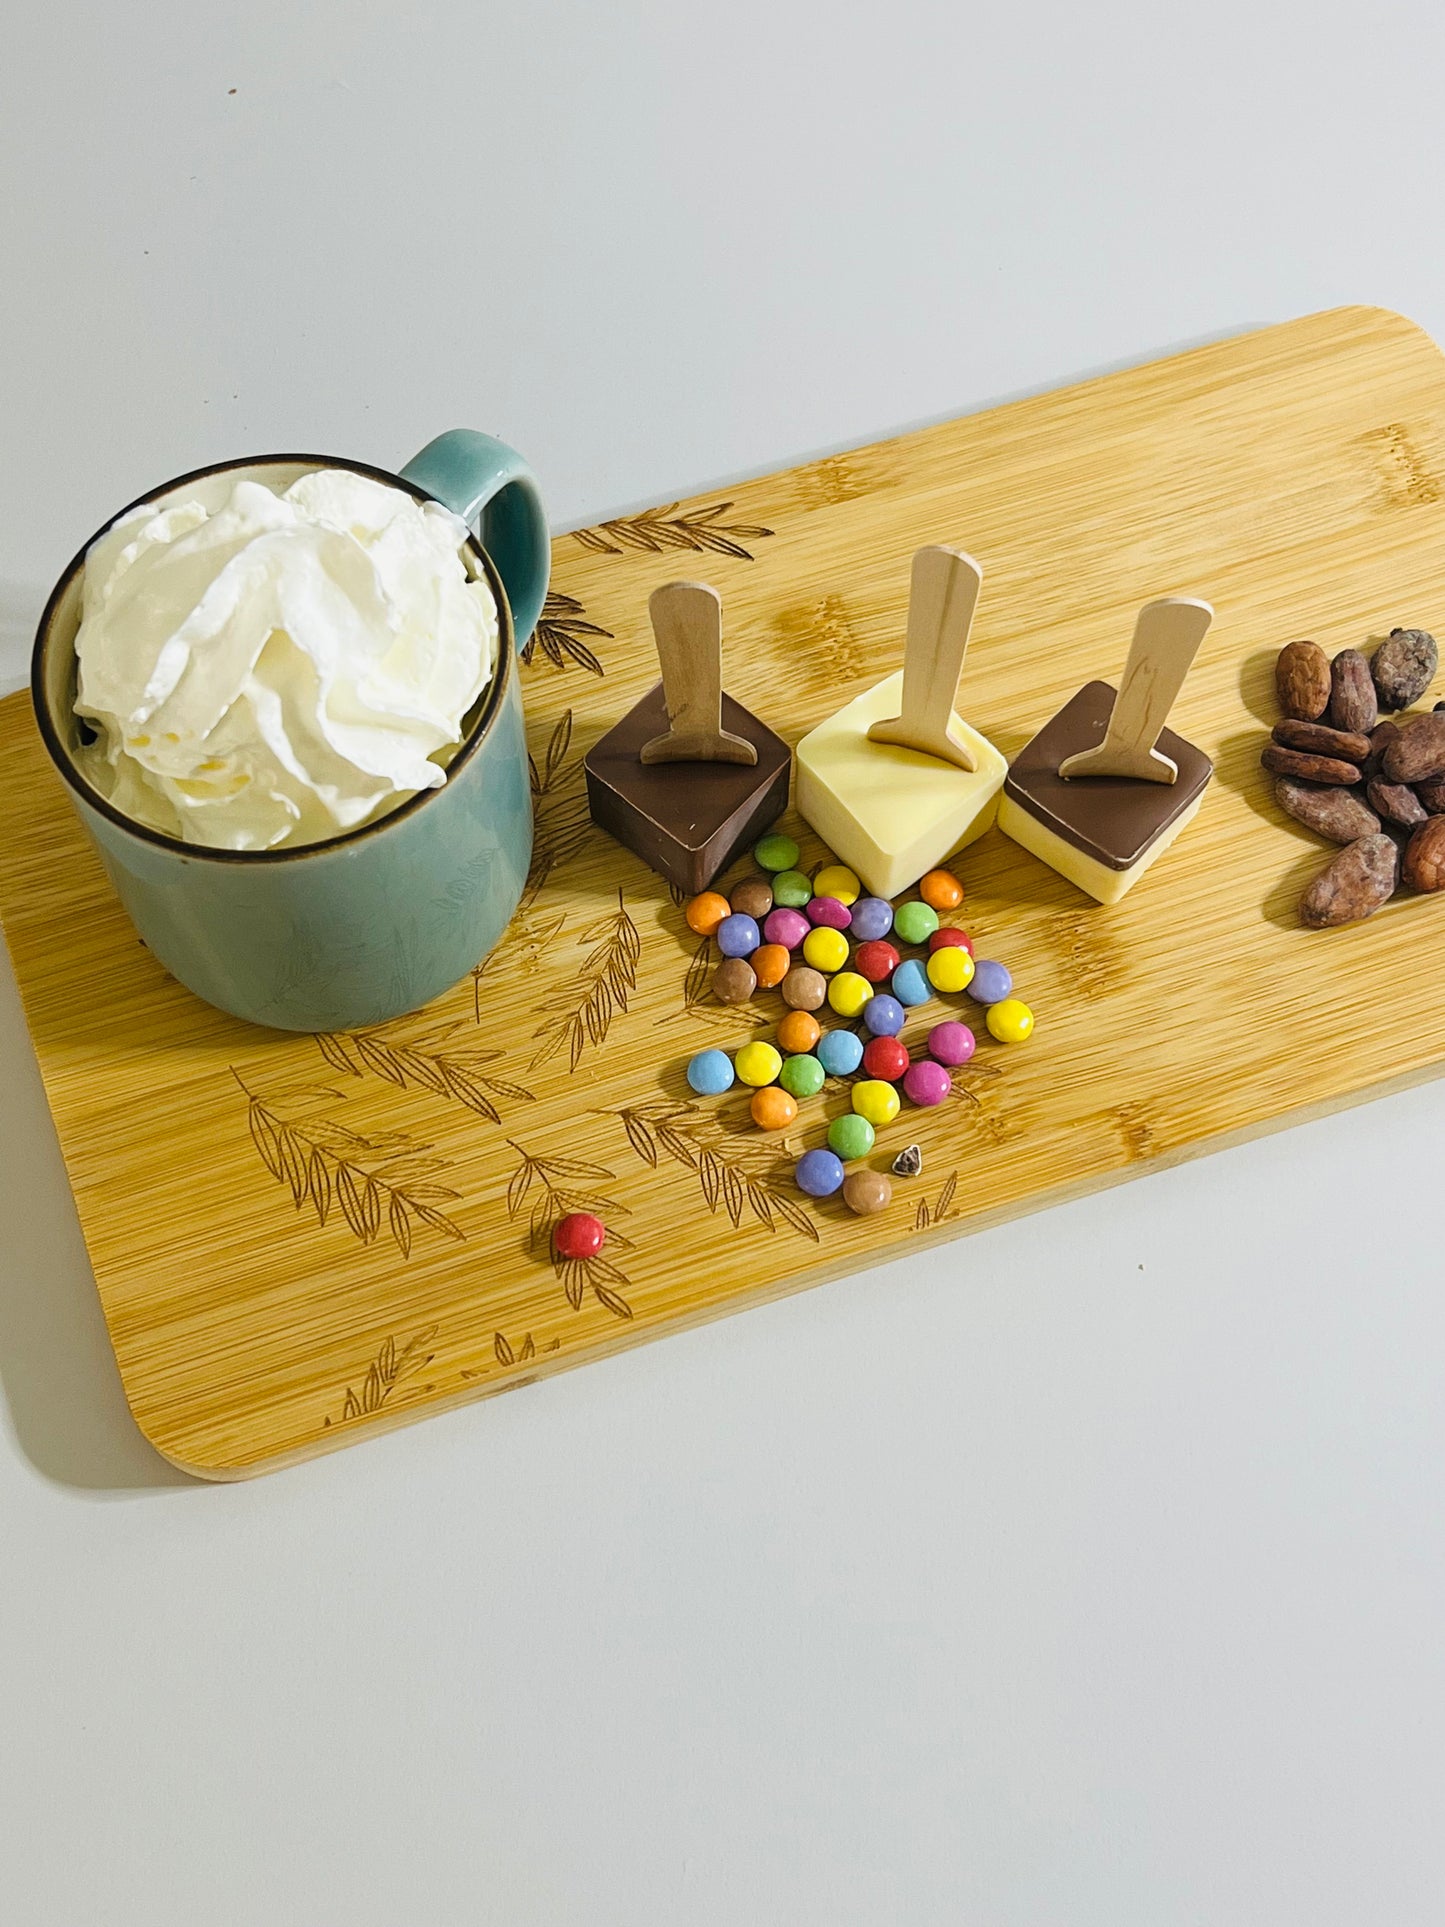 Hot Chocolate Spoon - with Chocolate Beans